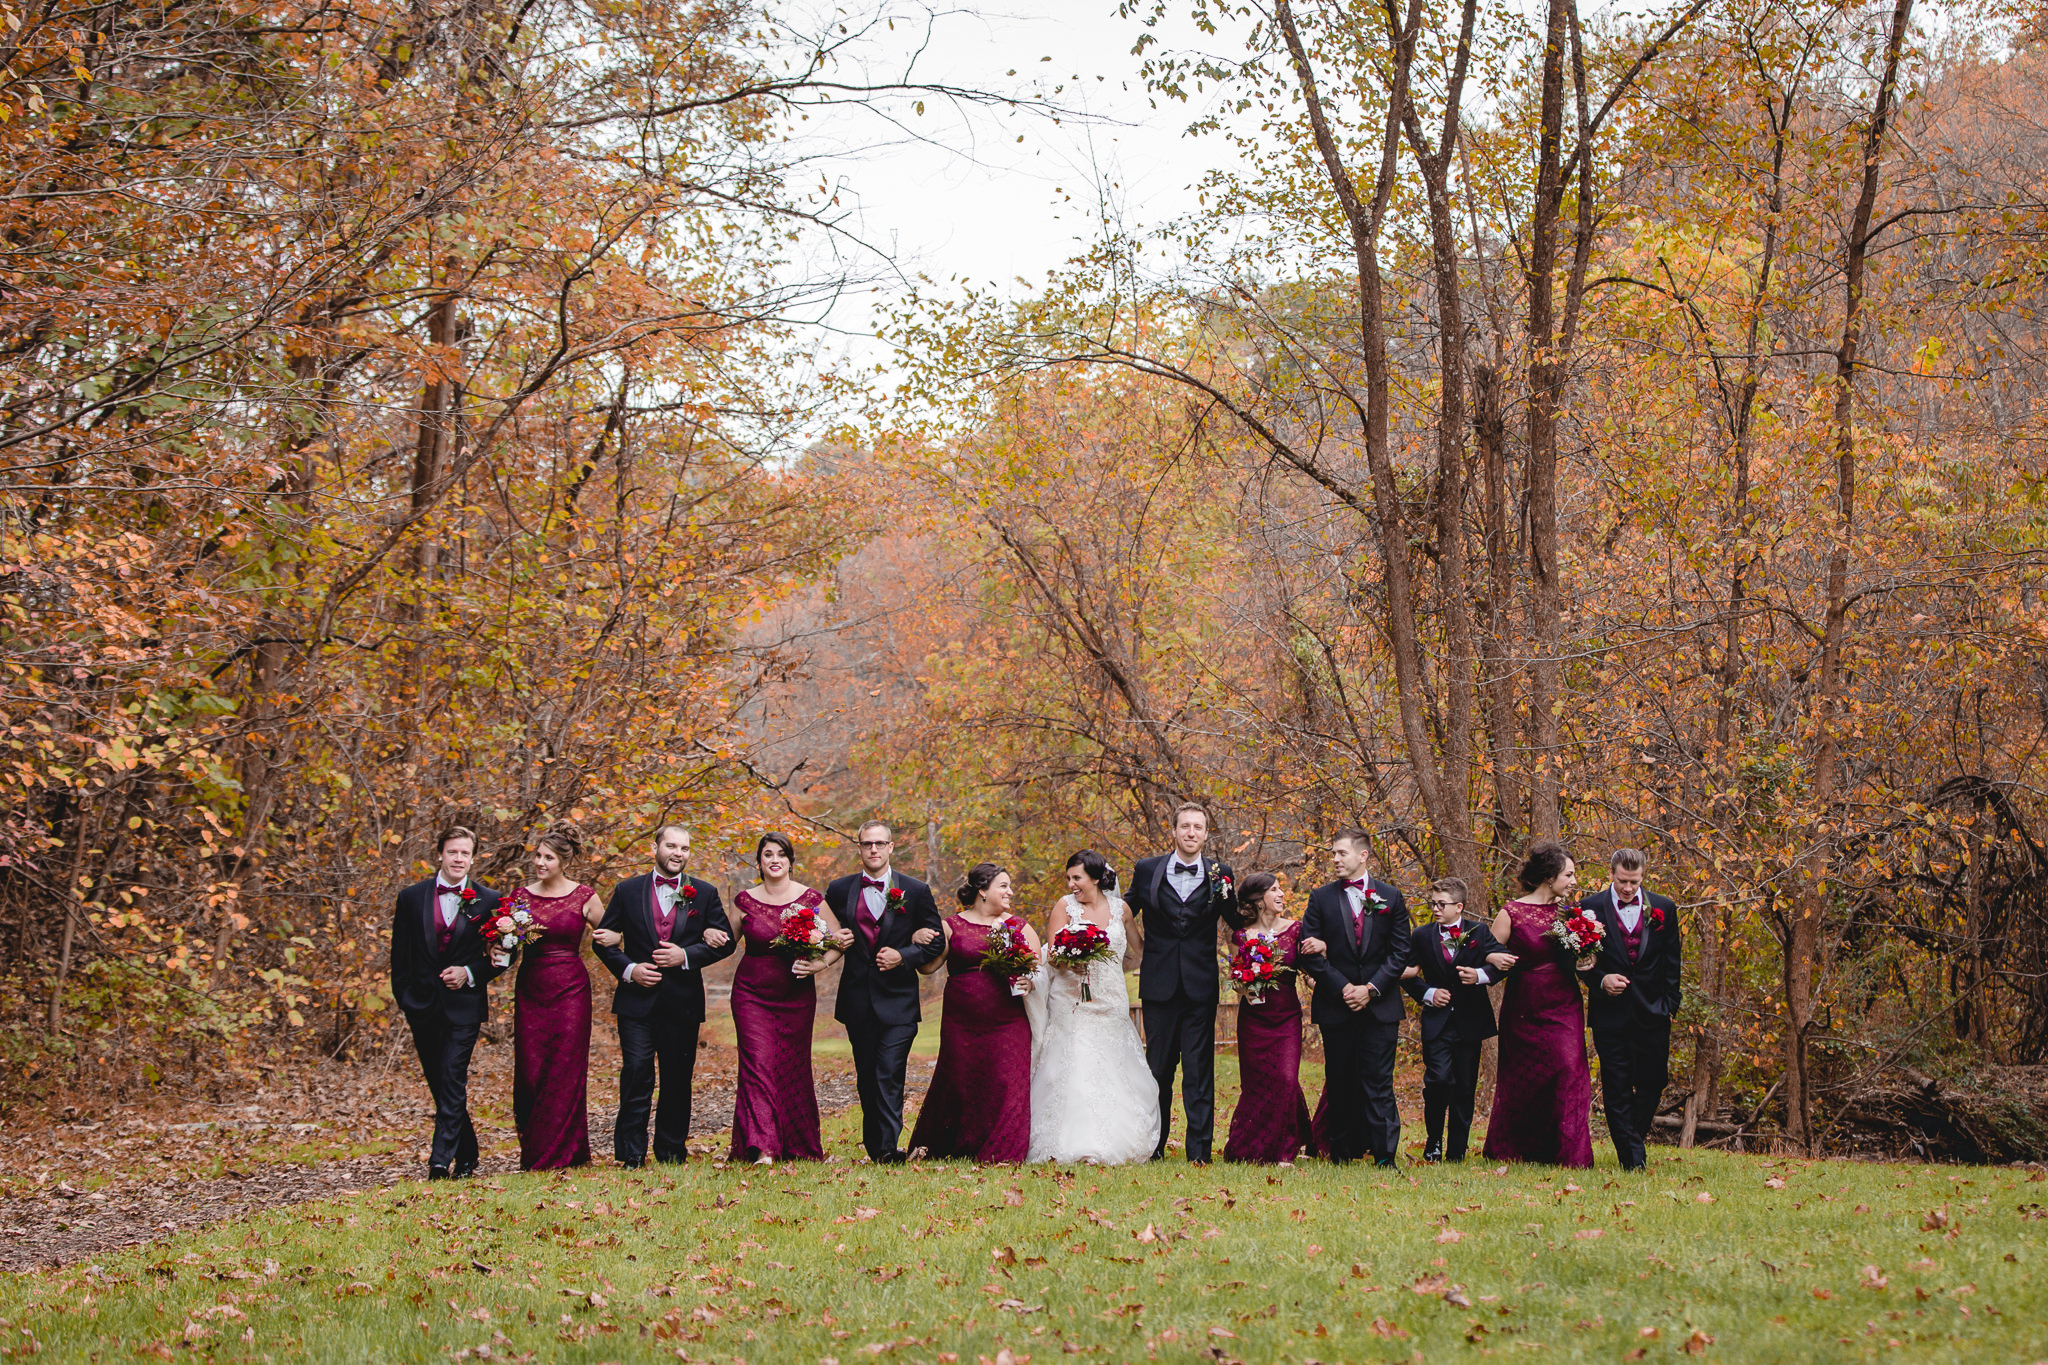 Bridal party in a park wearing burgundy for an October wedding in Moon Township